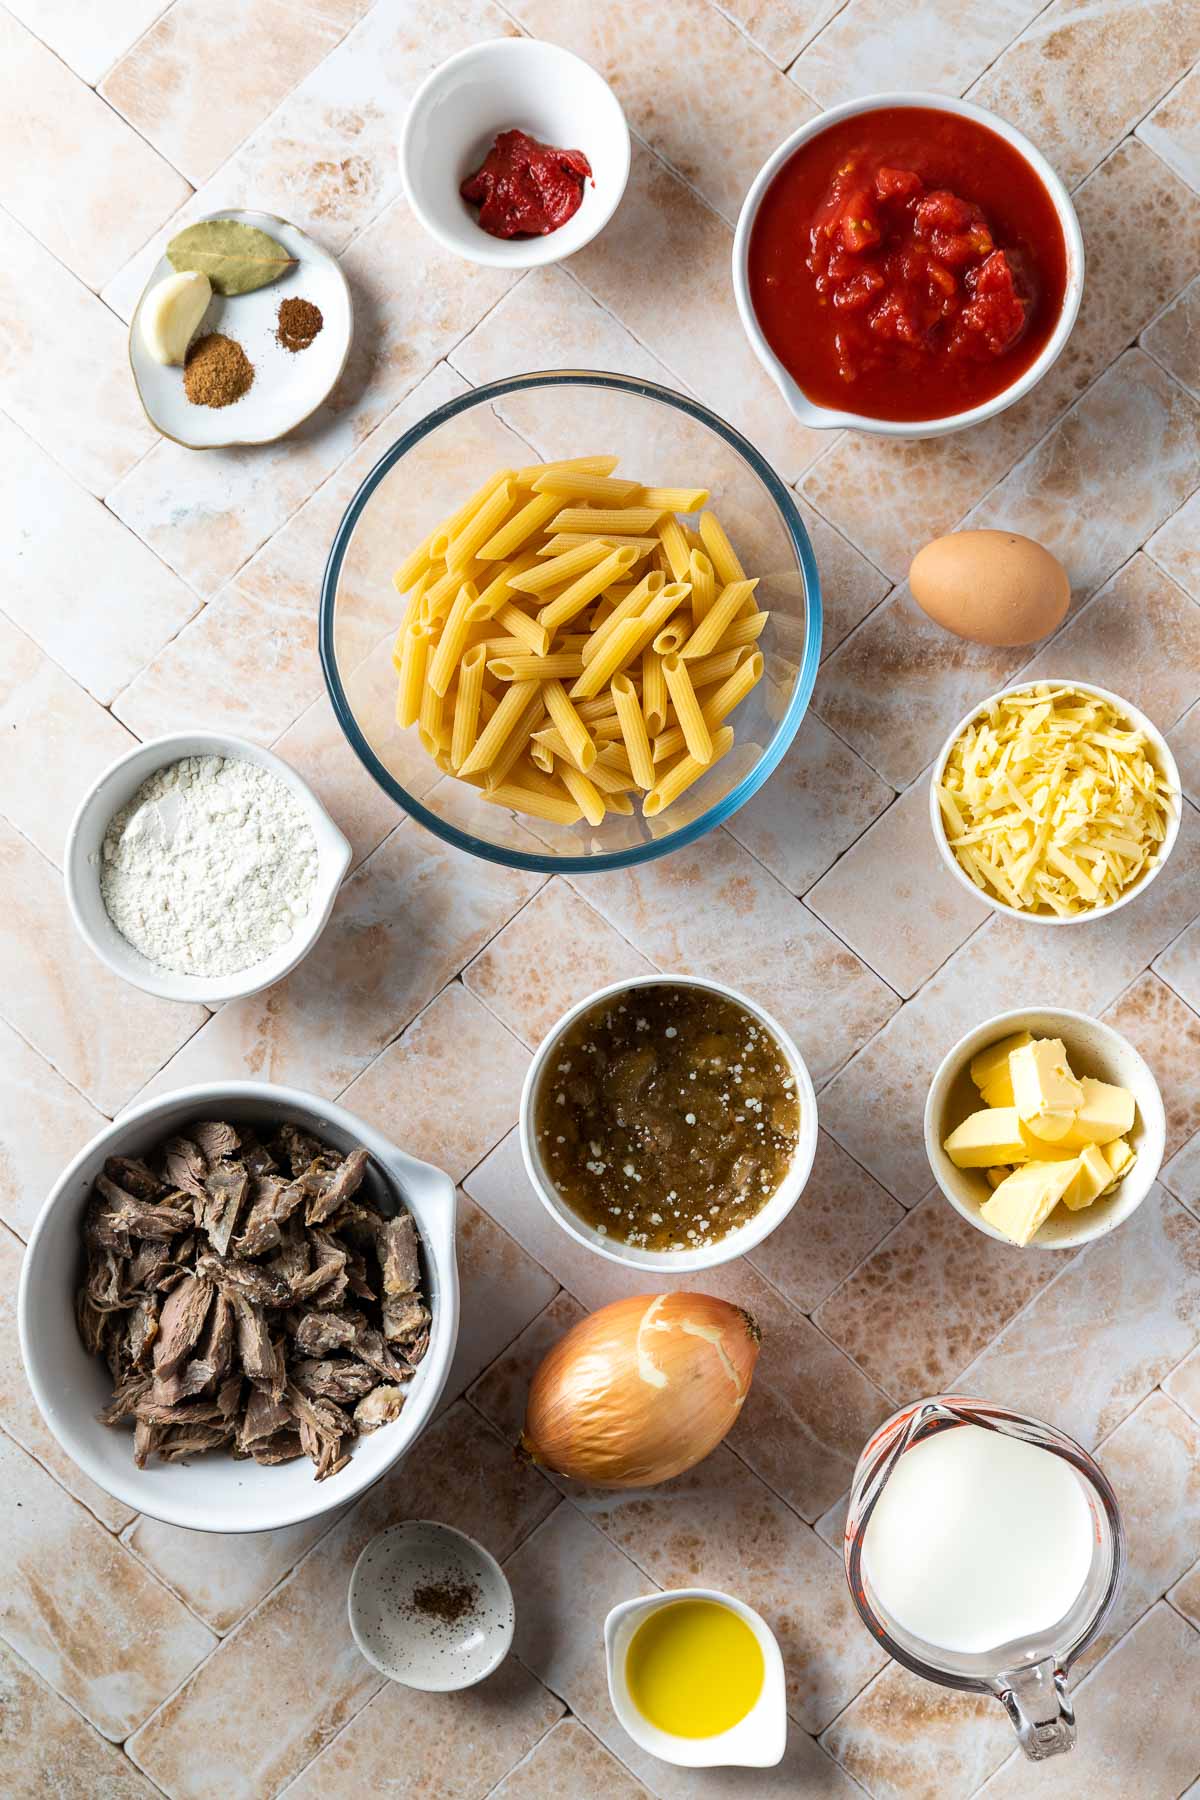 ingredients needed to make the lamb pasta bake weighed out and placed in individual bowls.